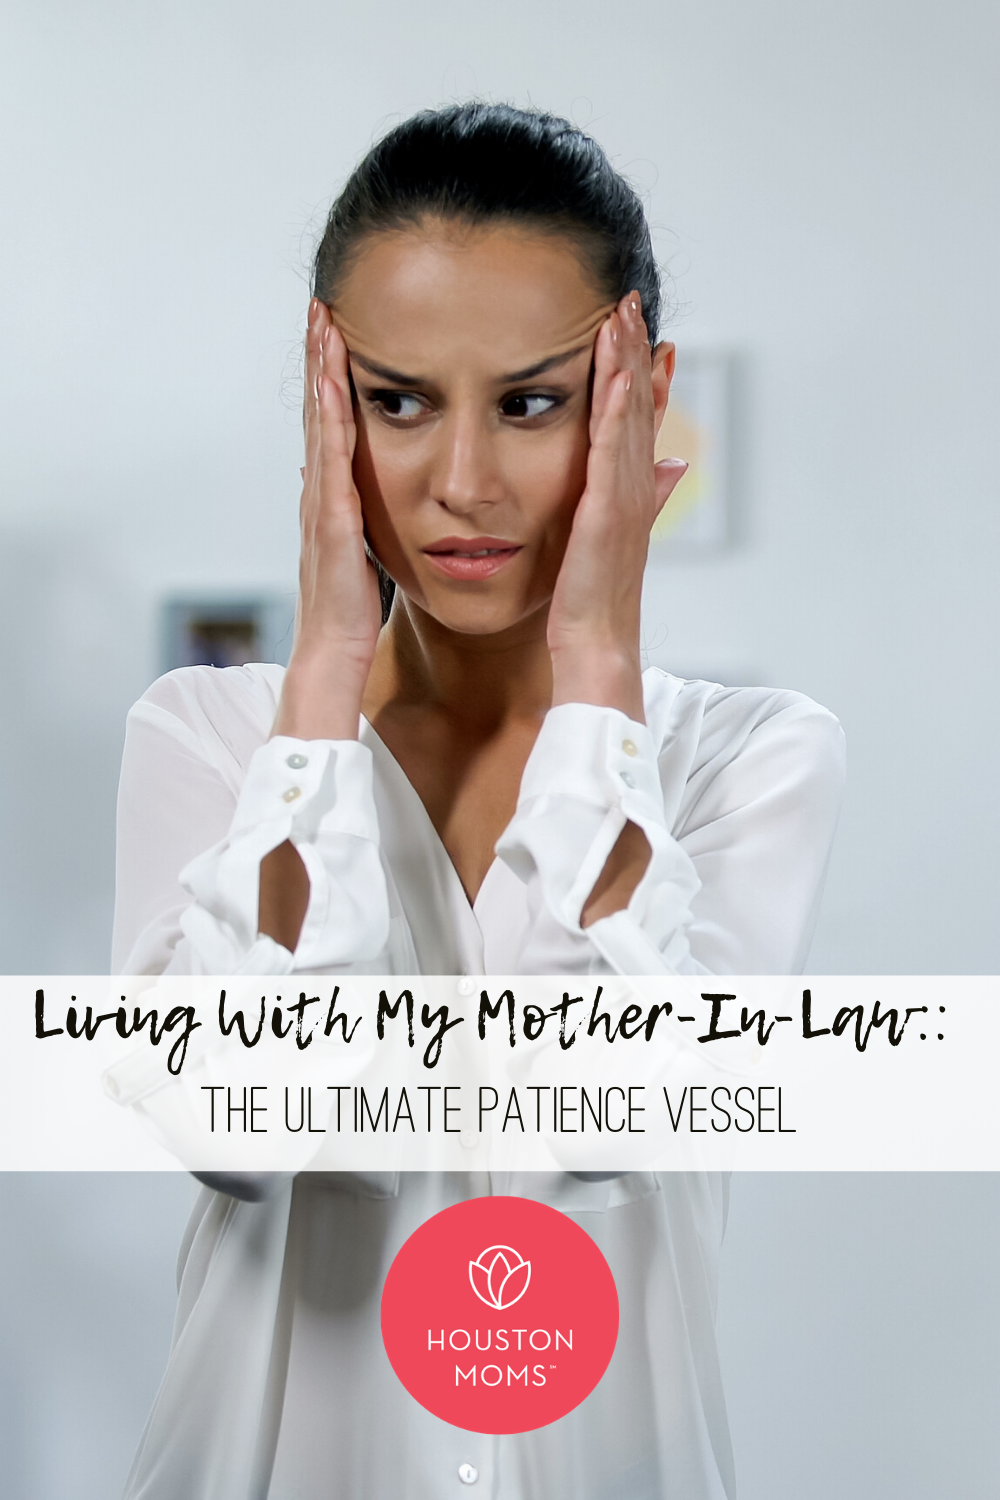 Living With My Mother-In-Law: The Ultimate Patience Vessel. Logo: Houston moms. A photograph of a stressed woman with her hands pressing her temples. 